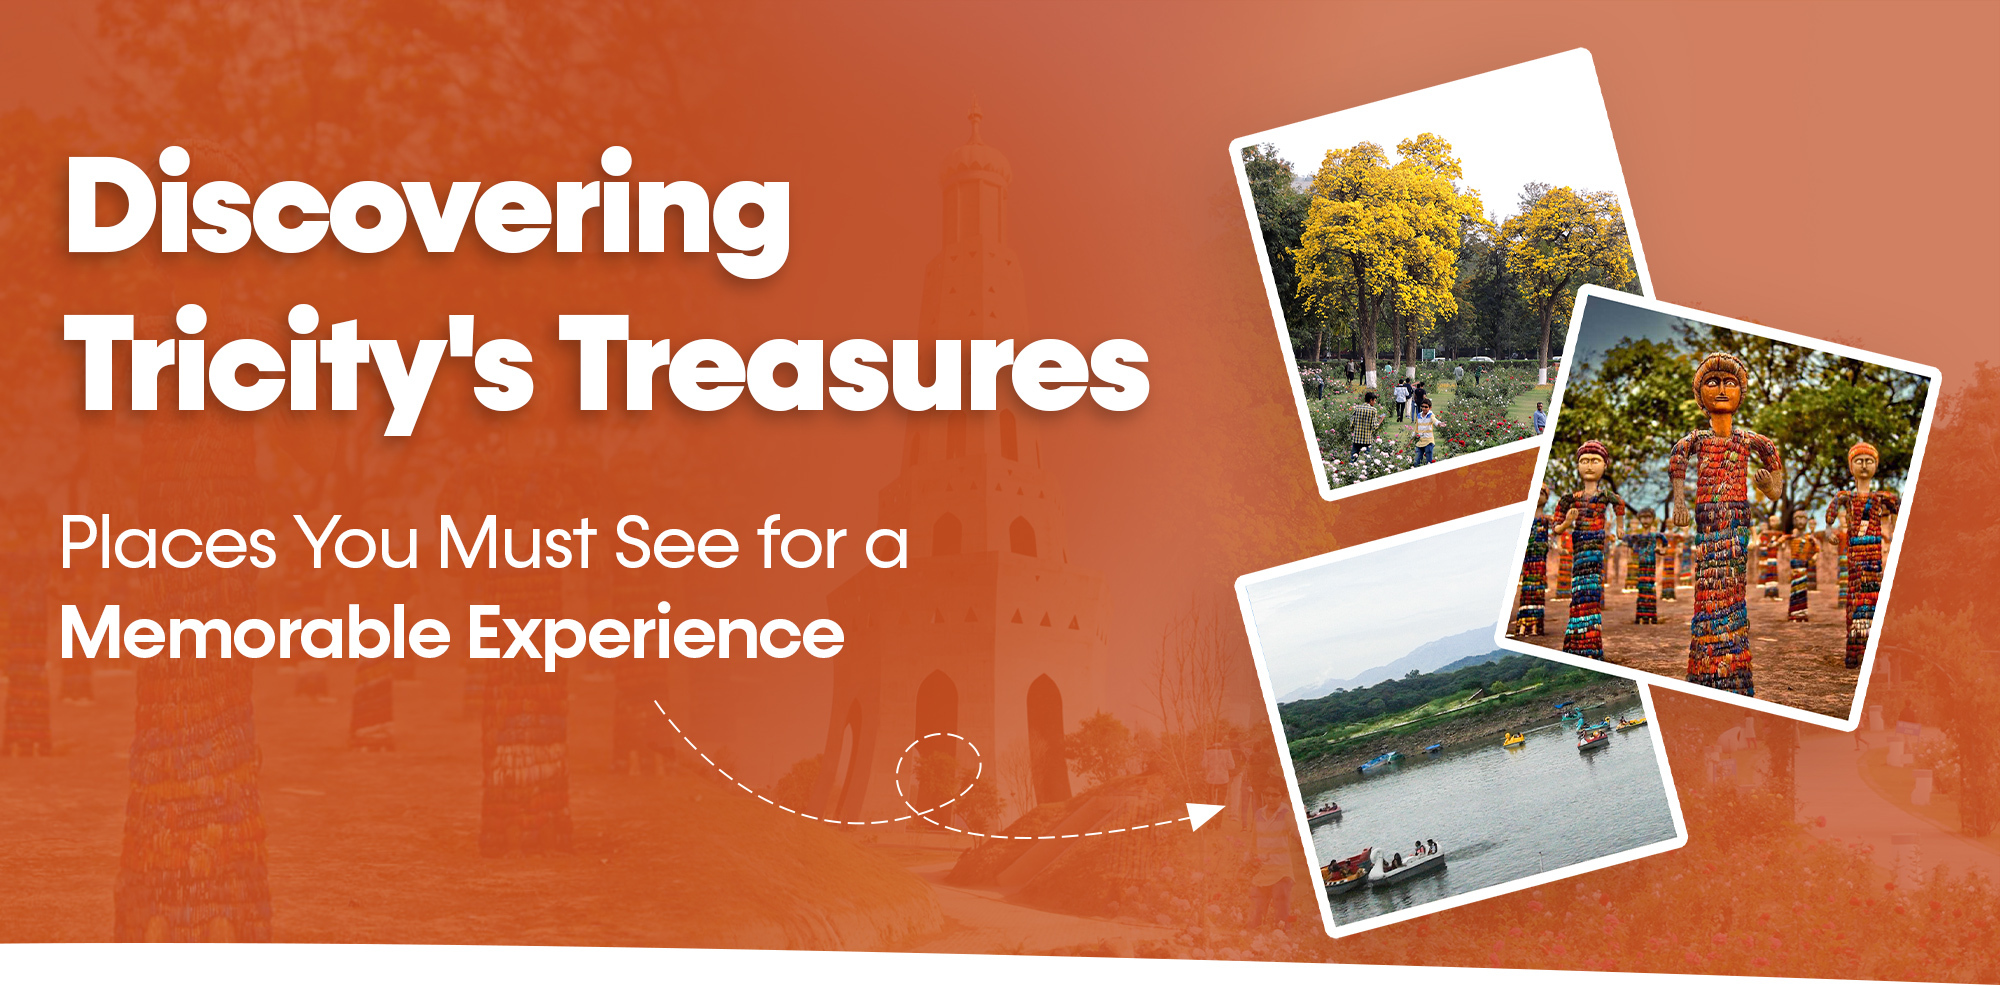 Discovering Tricity’s Treasures: Places You Must See for a Memorable Experience